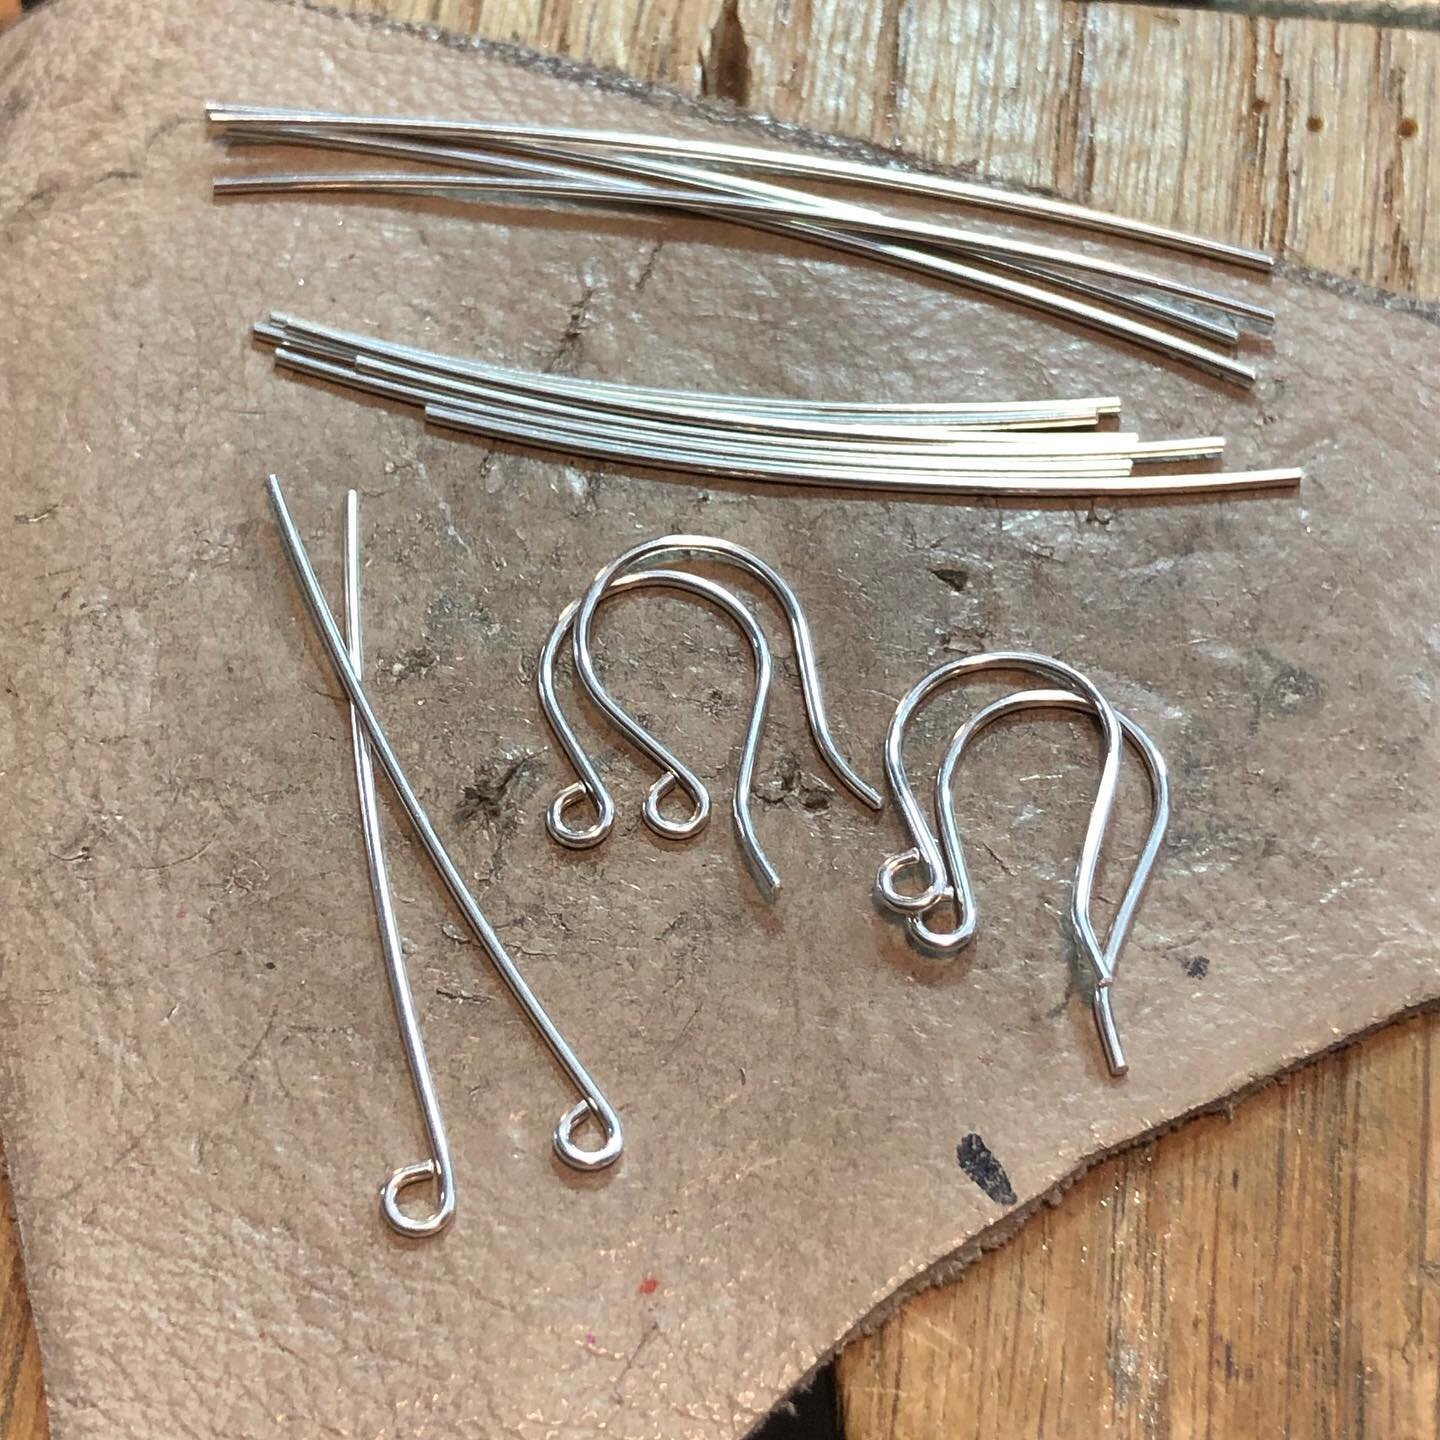 Making ear wires today. Did you know that all the ear wires in my jewelry are handmade with recycled sterling silver? 😊#earwires #handmade #megtangjewelry #greenjewelry www.megtang.com